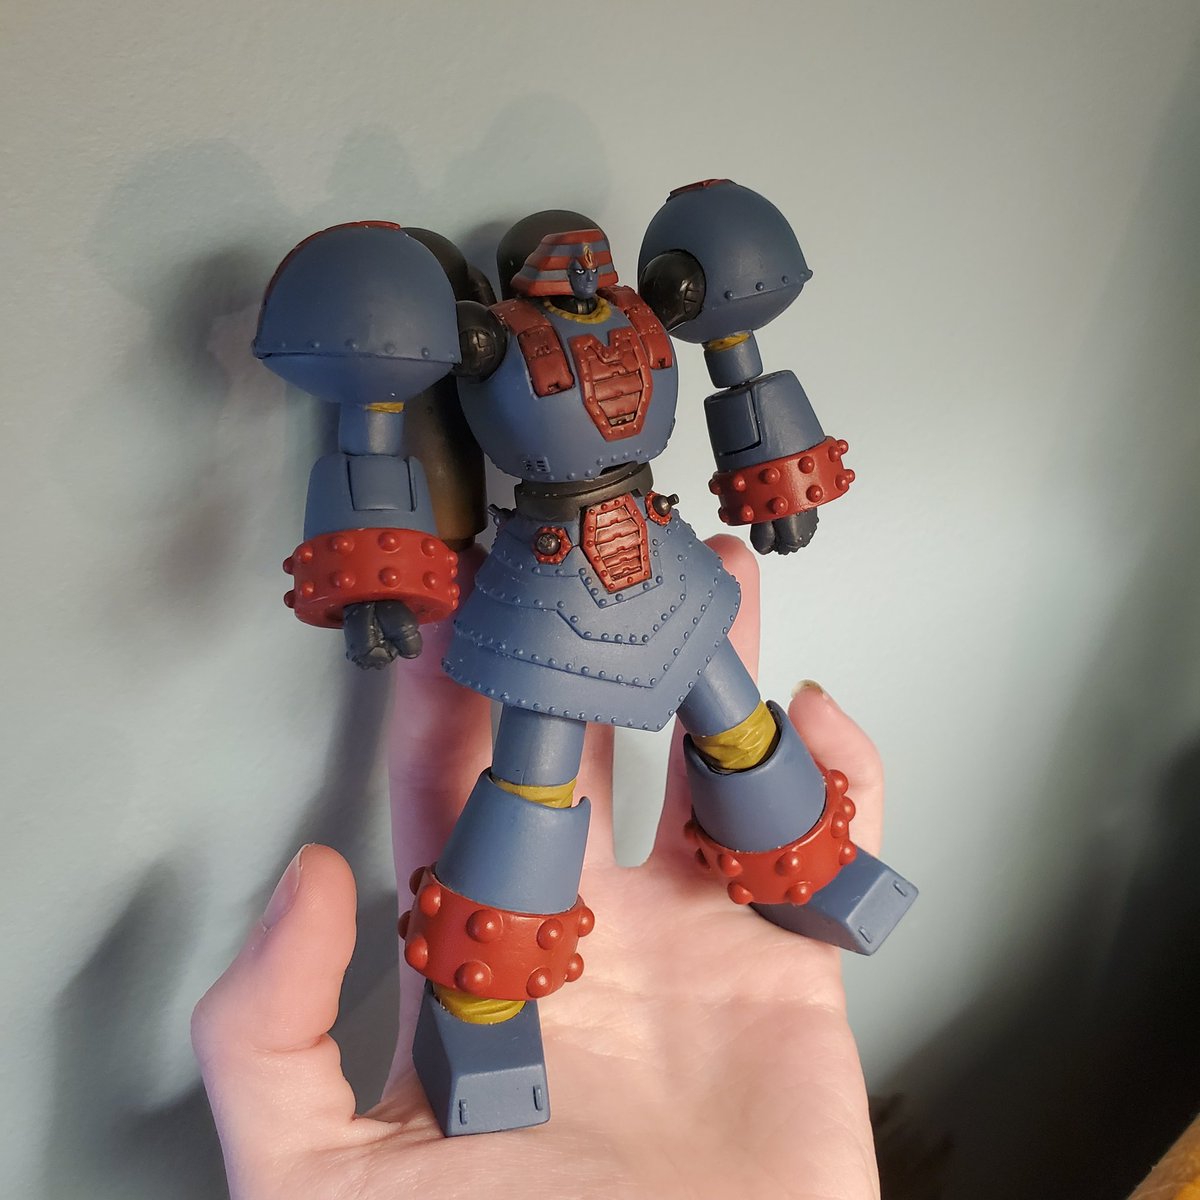 I don't think I ever posted pics of the Giant Robo figure I bought at comicon, so here he is! Idk much about figure collecting but I do know he is a Revoltech figure and he is very old. The box was already opened when I bought him and his alt hands are missing but I love him :)